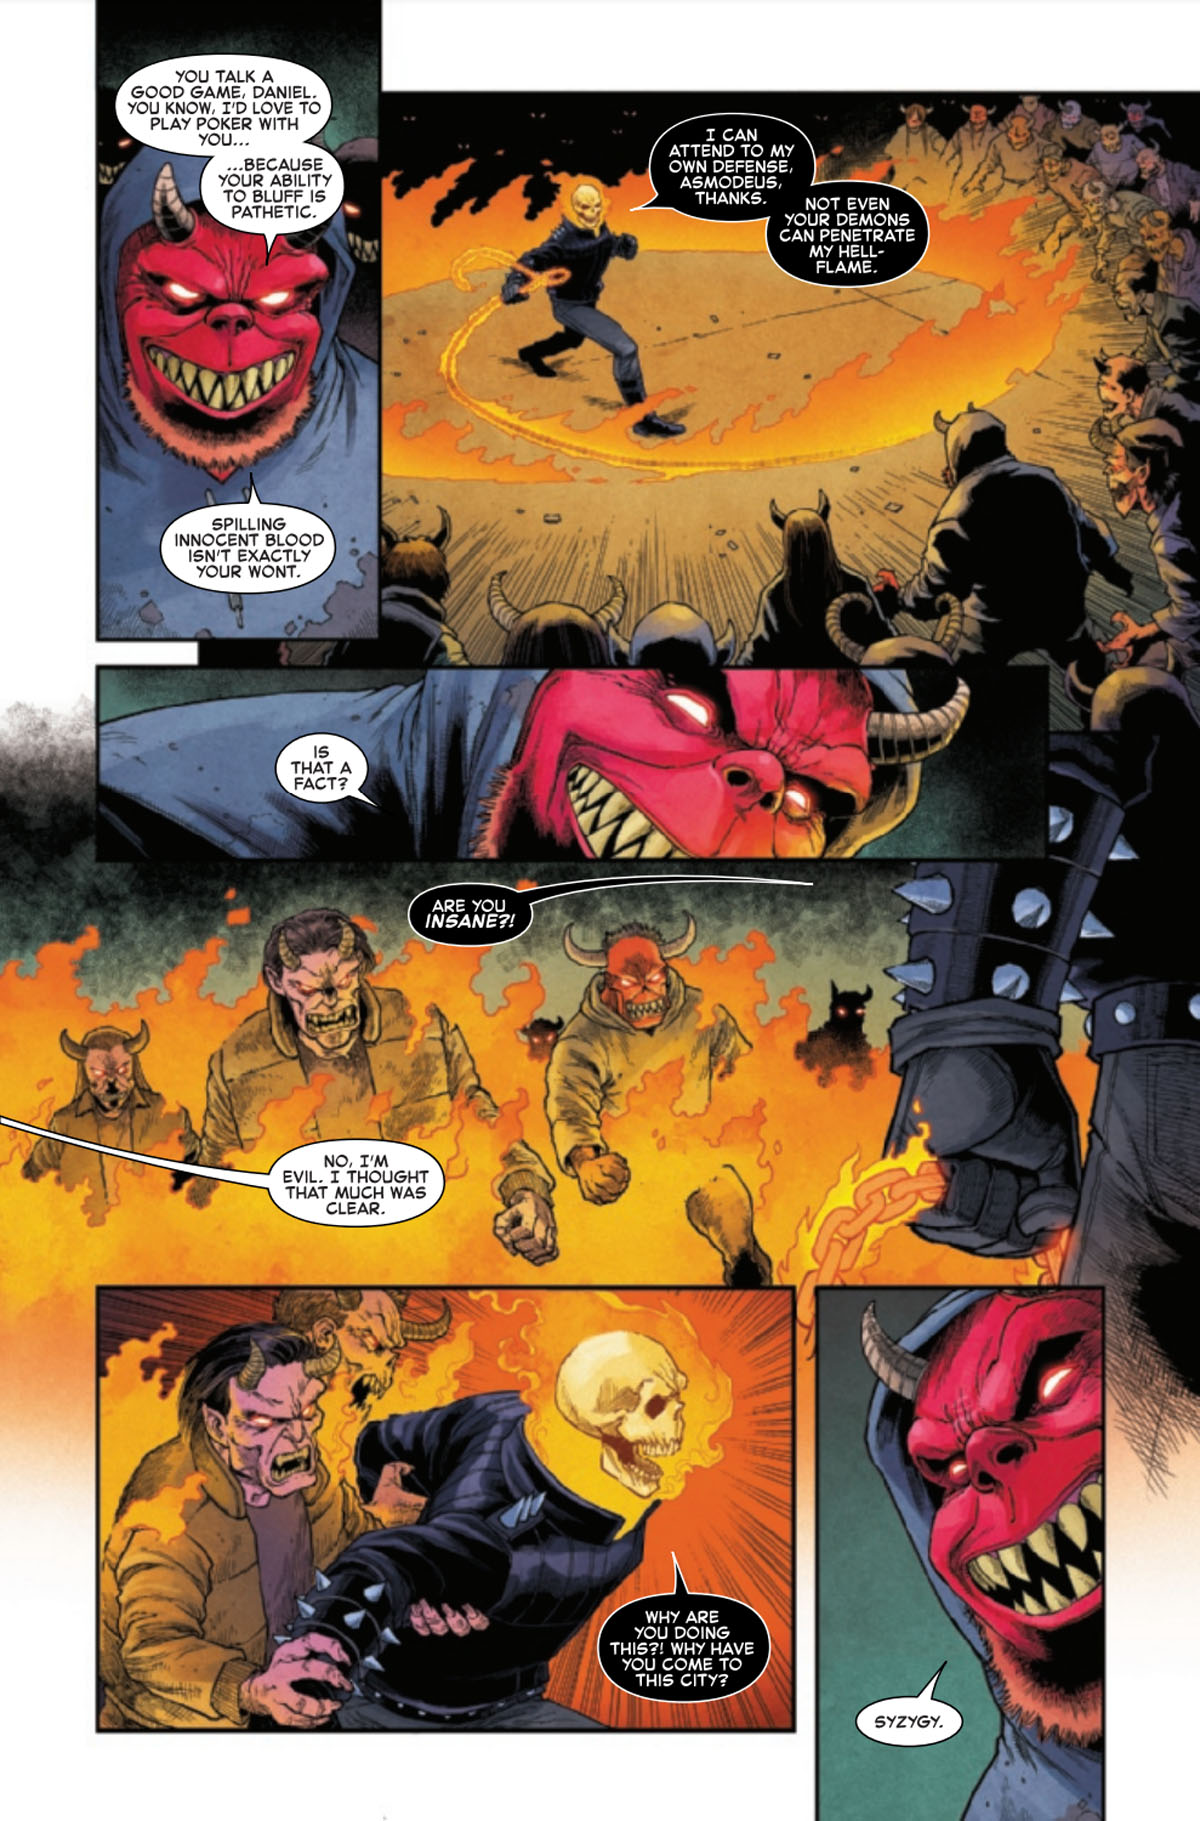 New Fantastic Four #2 page 3